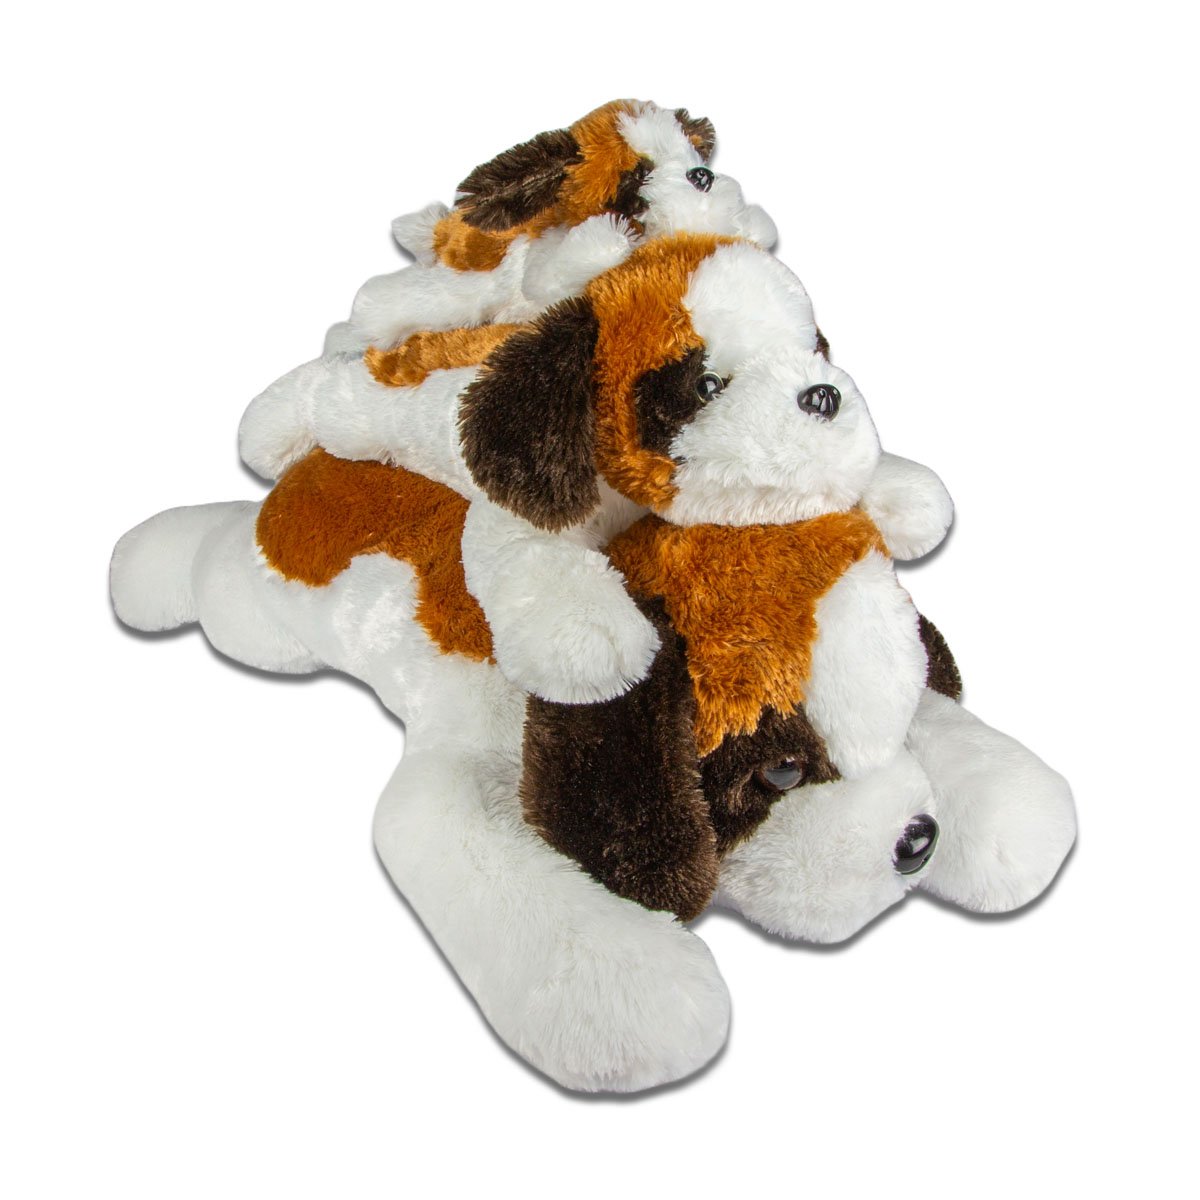 Barry plush laying down